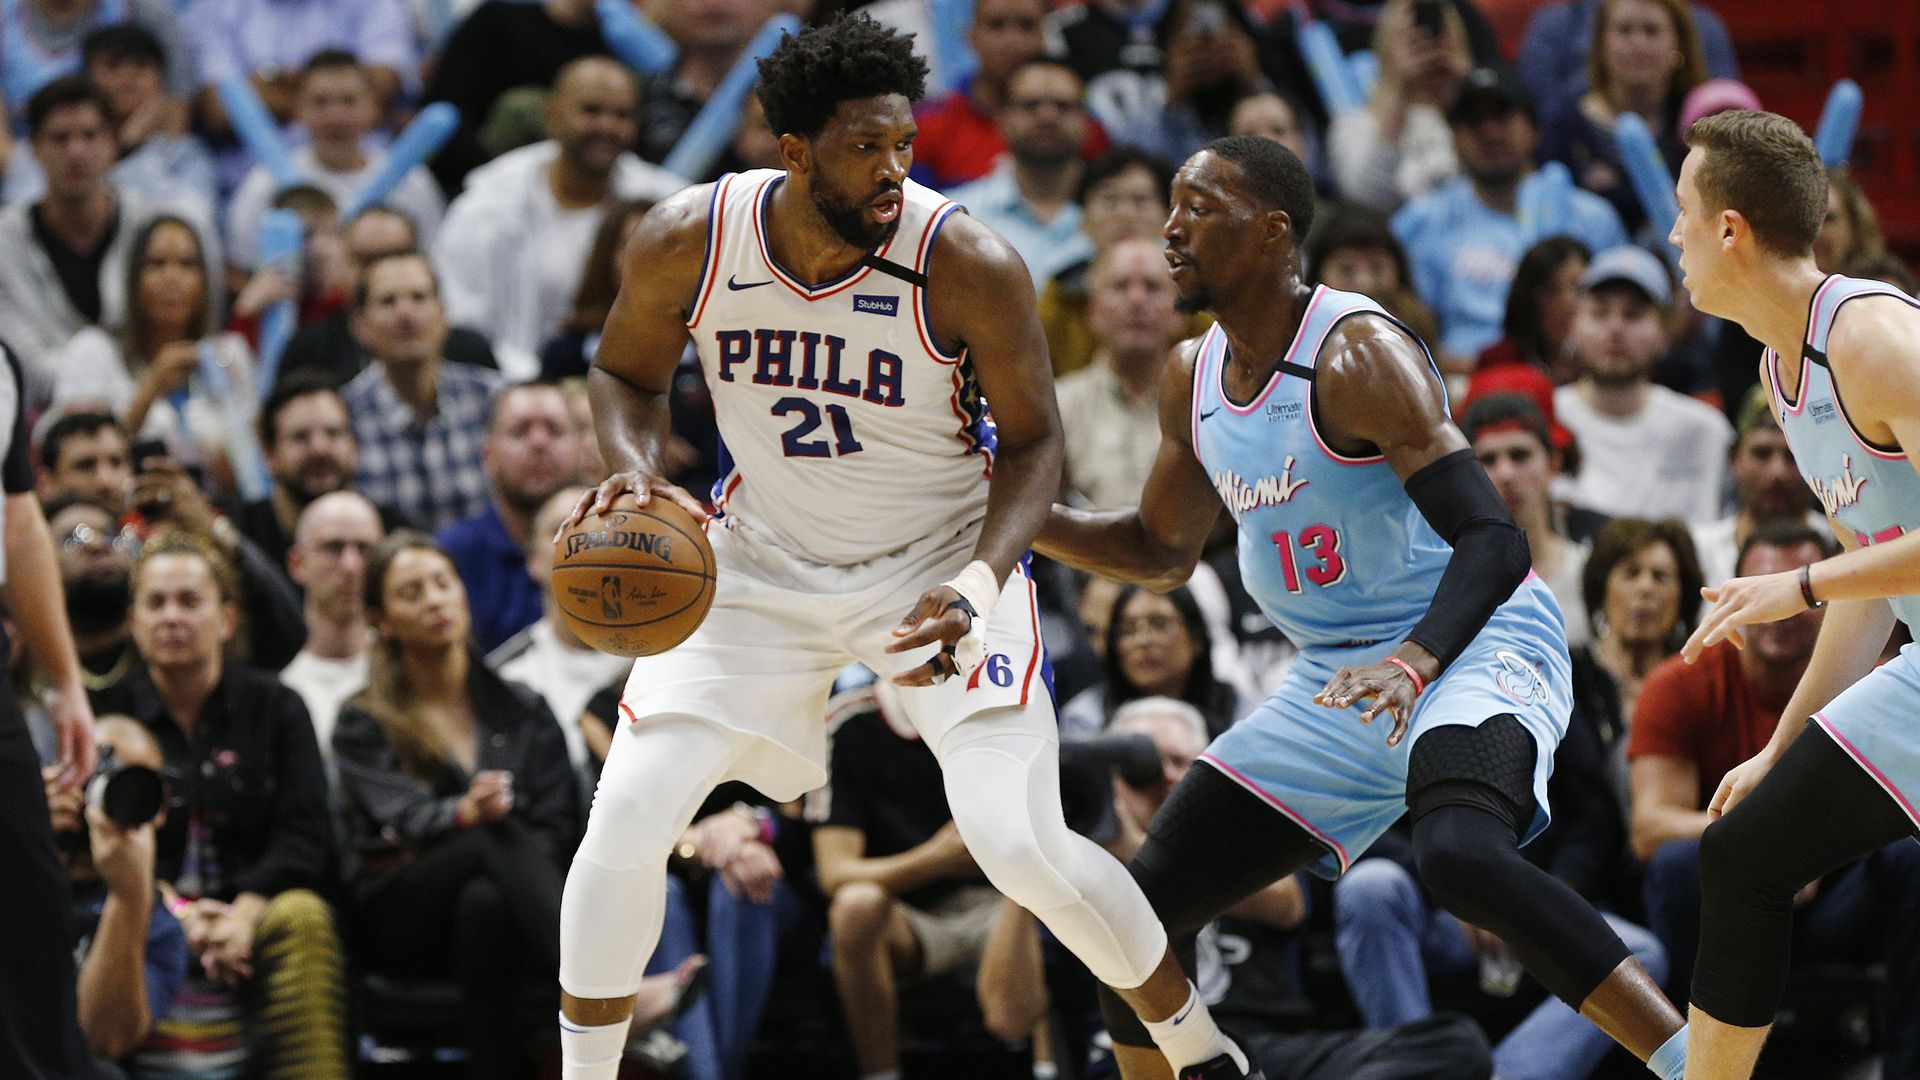 Joel Embiid #21 of the Philadelphia 76ers is defended by Bam Adebayo #13 of the Miami Heat during the second half at American Airlines Arena on February 03, 2020 in Miami, Florida.